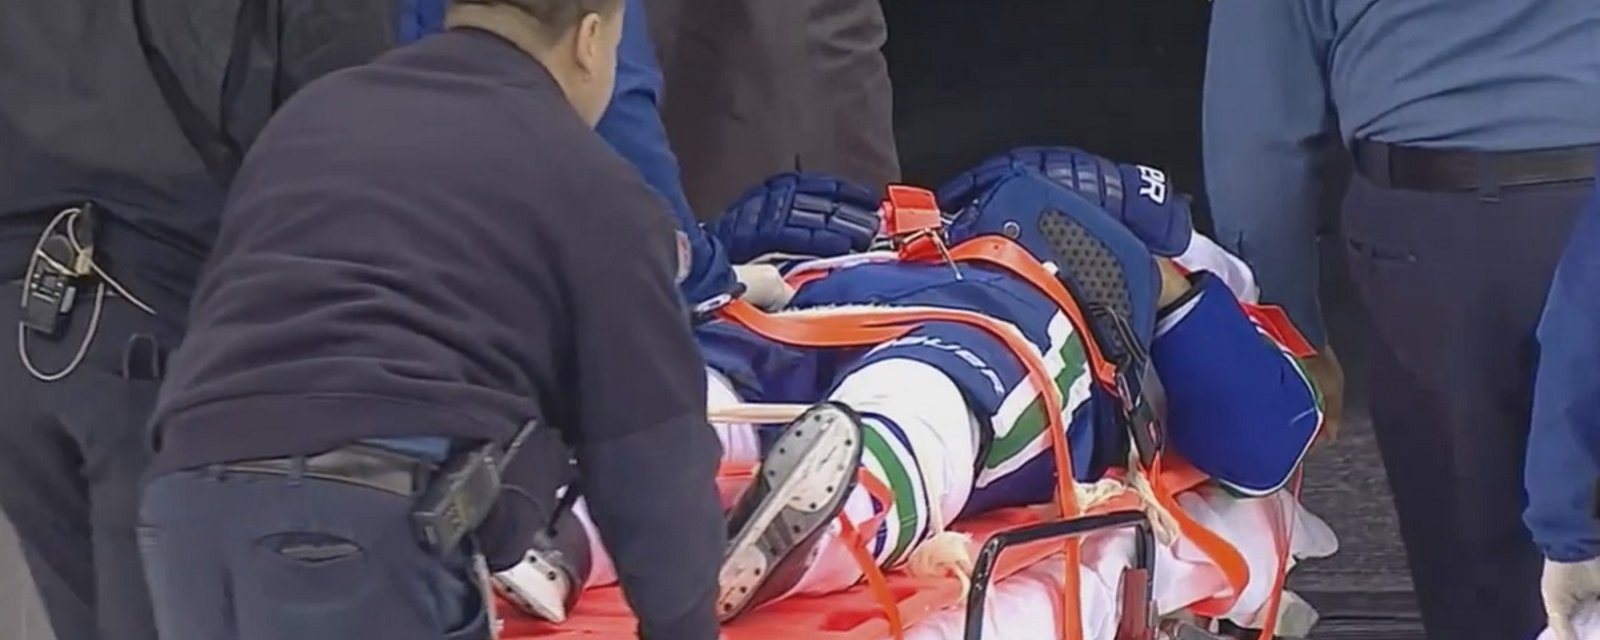 Breaking: 26-year-old defenseman taken out on a stretcher after scary hit.